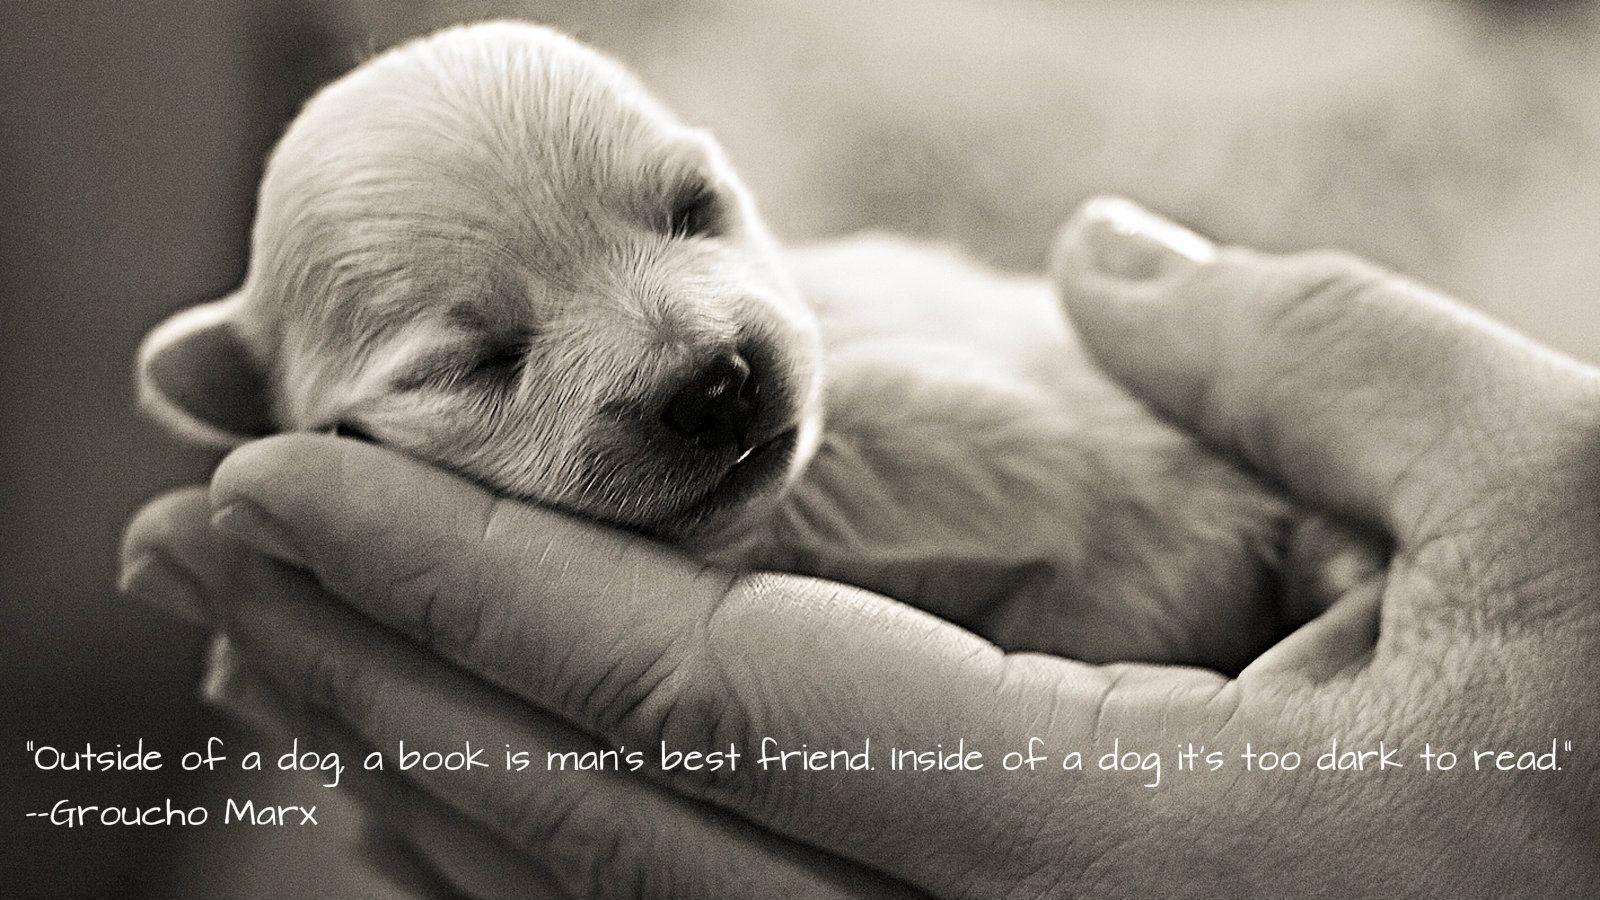 Wallpaper Quotes About Dogs. QuotesGram. Dog quotes, Dog